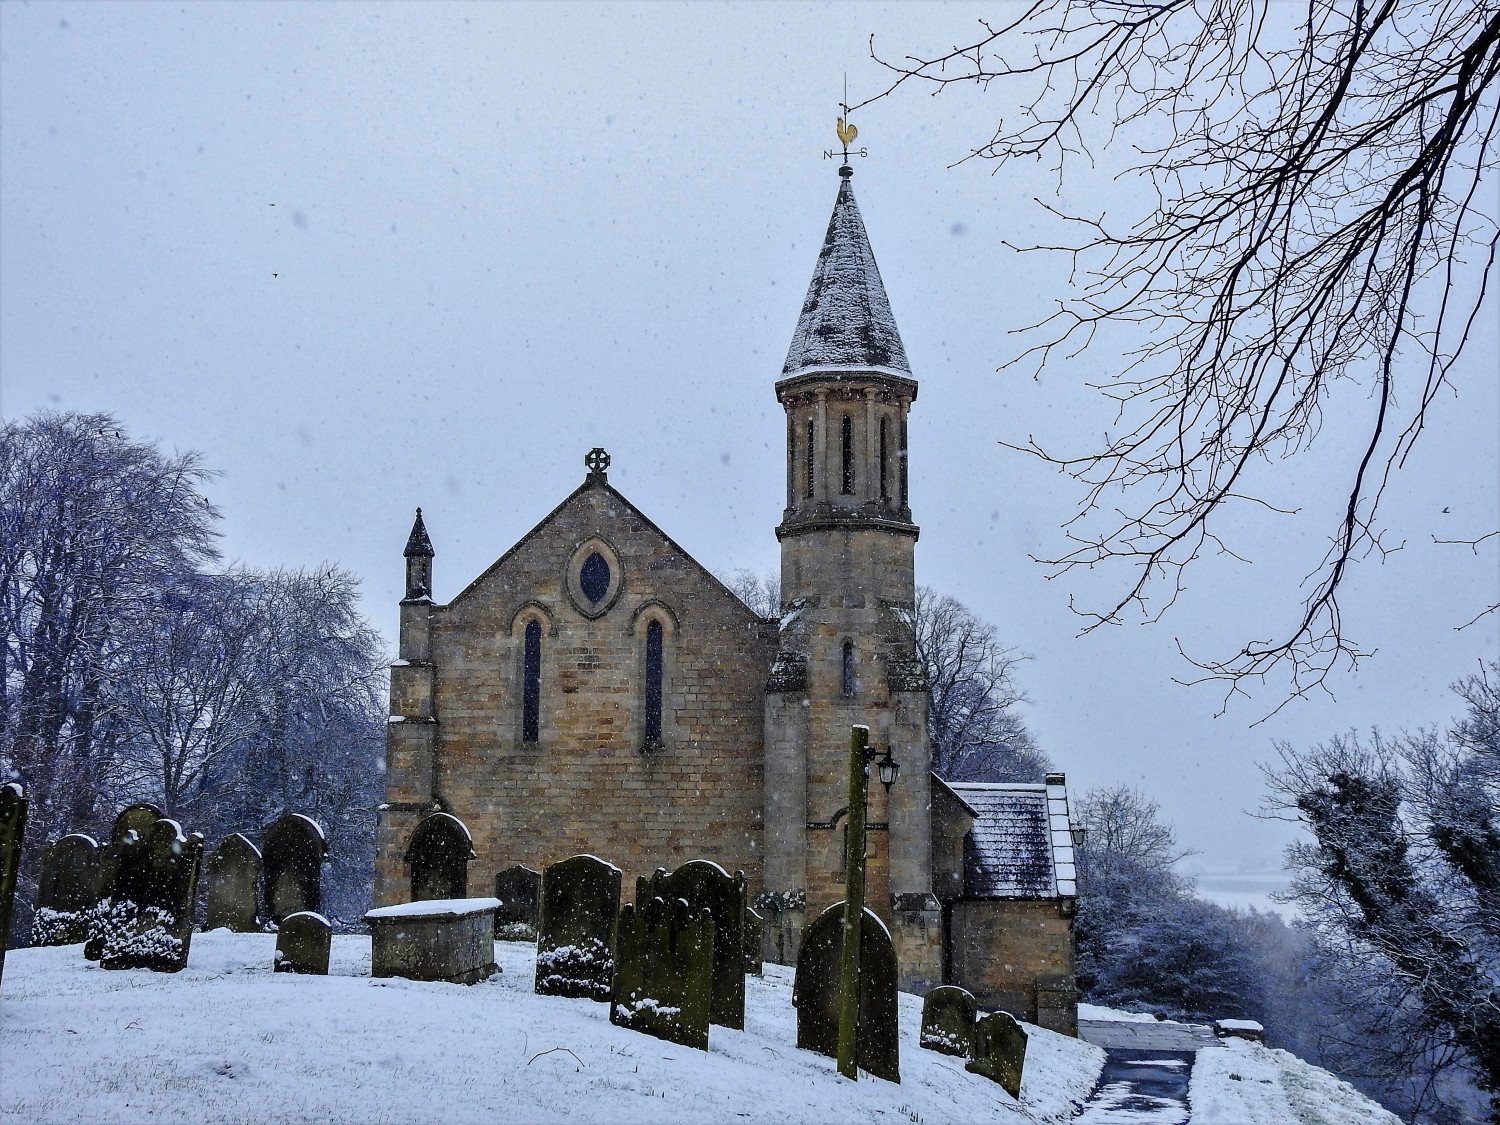 Church with gravestones in foreground. Grey sky and snow on the ground.